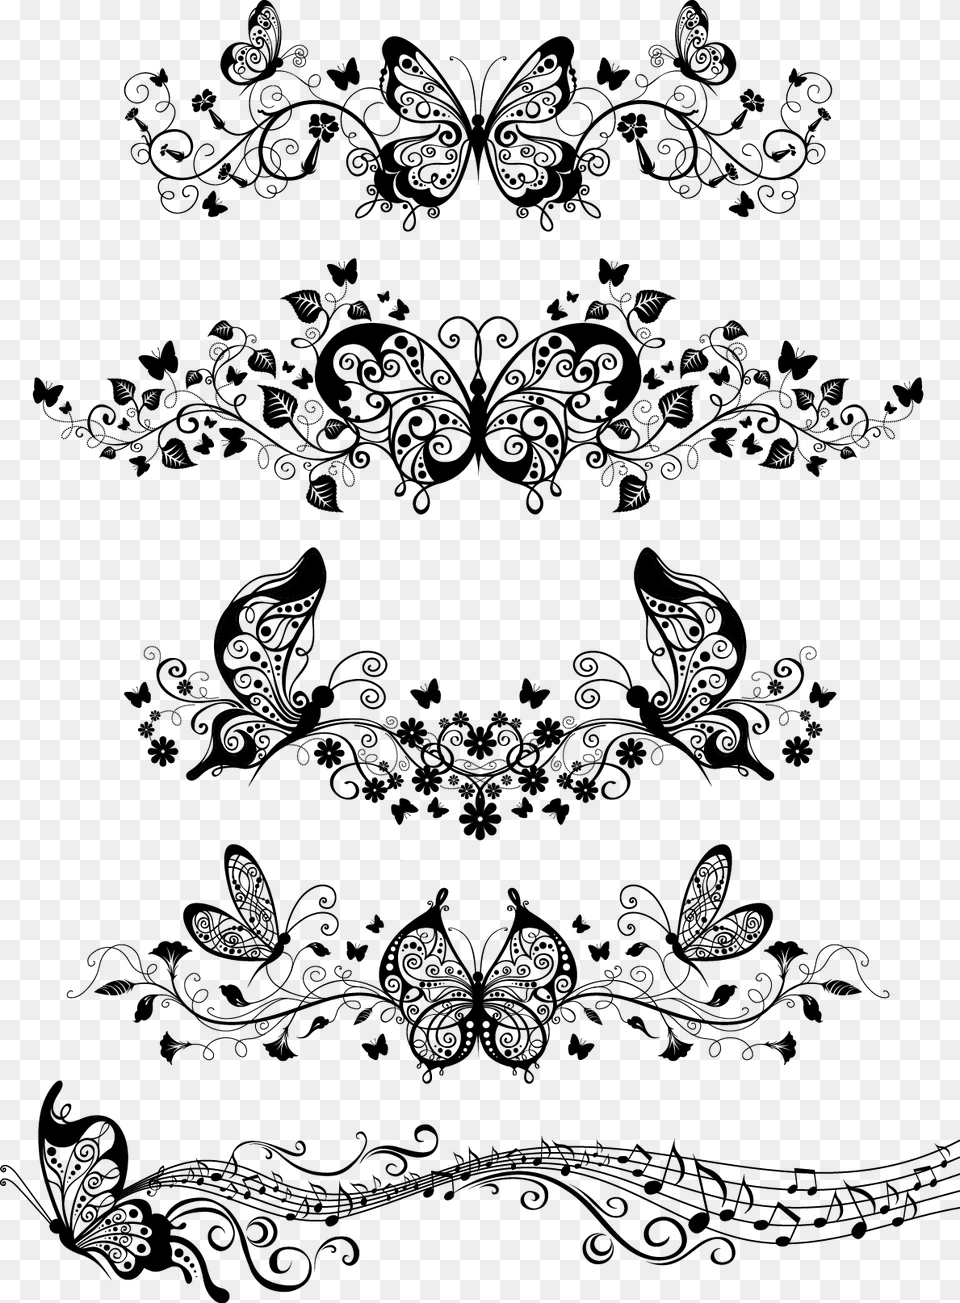 Floral With Butterflies Vector Butterfly Ornaments Vector, Art, Floral Design, Graphics, Pattern Png Image